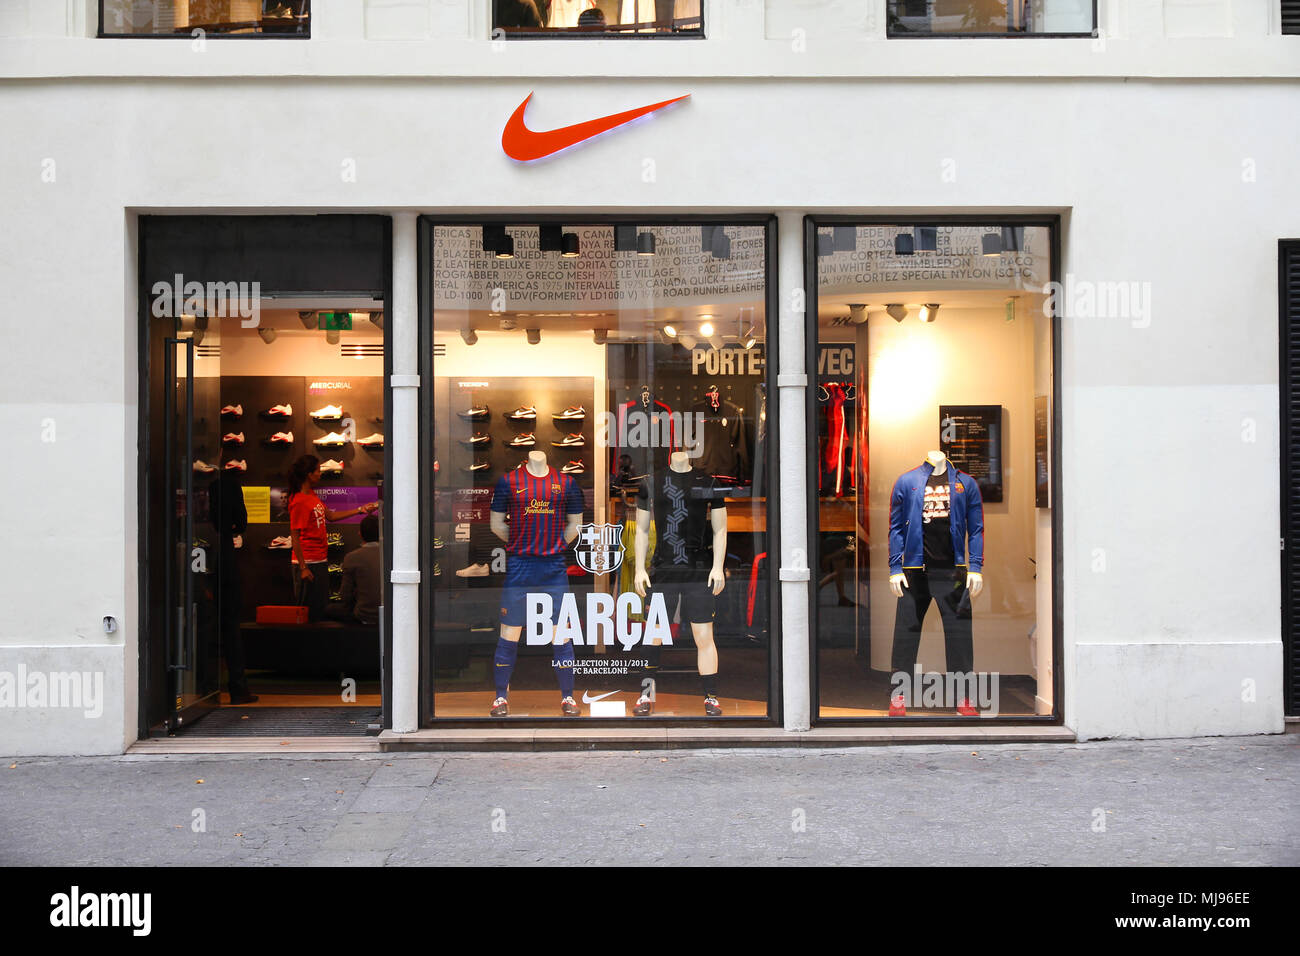 Nike Town Store High Resolution Stock Photography and Images - Alamy